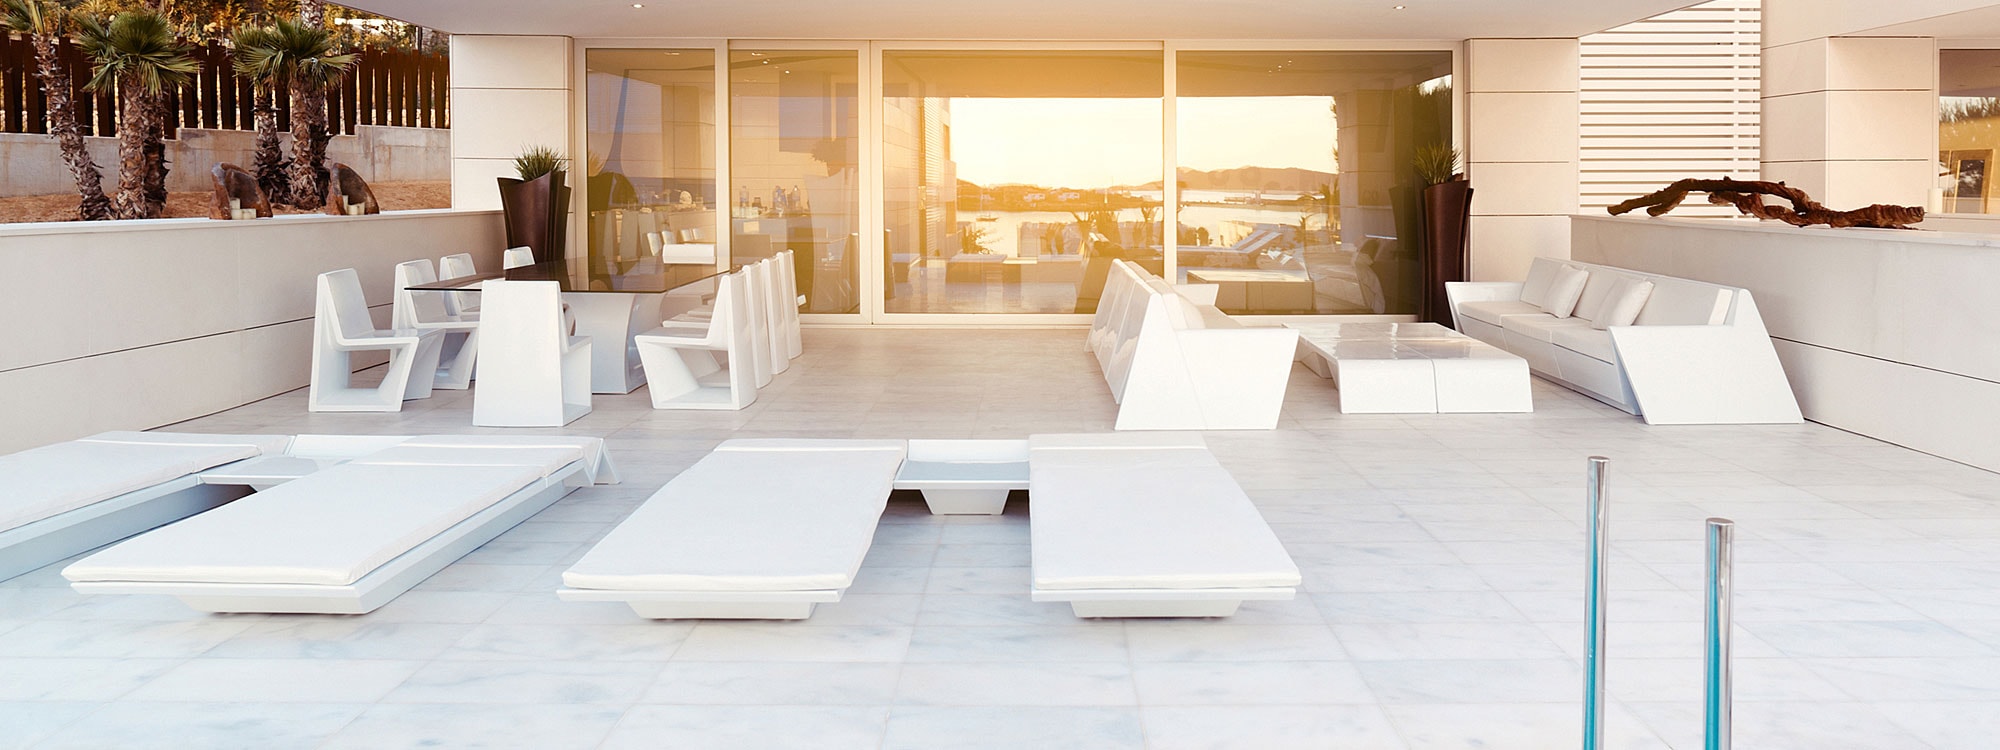 Dusk Shot Of REST Modern MODULAR Garden SOFA, ALL WEATHER Sofa Designed By A-cero - Spain. REST CONTEMPORARY Outdoor Sofas Are Made In HIGH QUALITY Outdoor Sofa Materials And Are Supplied By Vondom LUXURY Exterior Furniture Co.